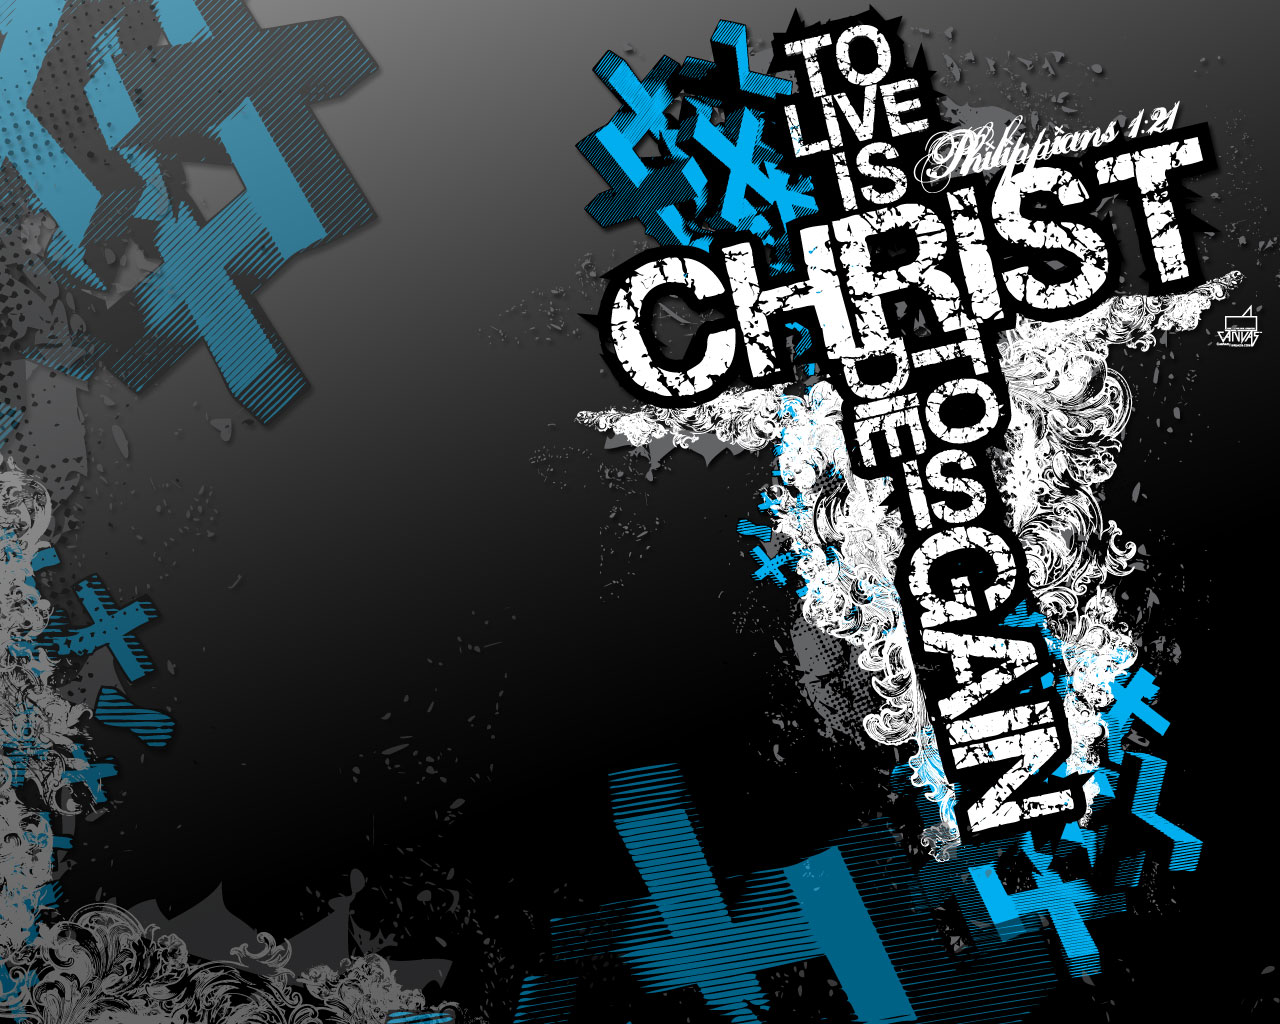 Christian Wallpaper And Desktop Background With Image